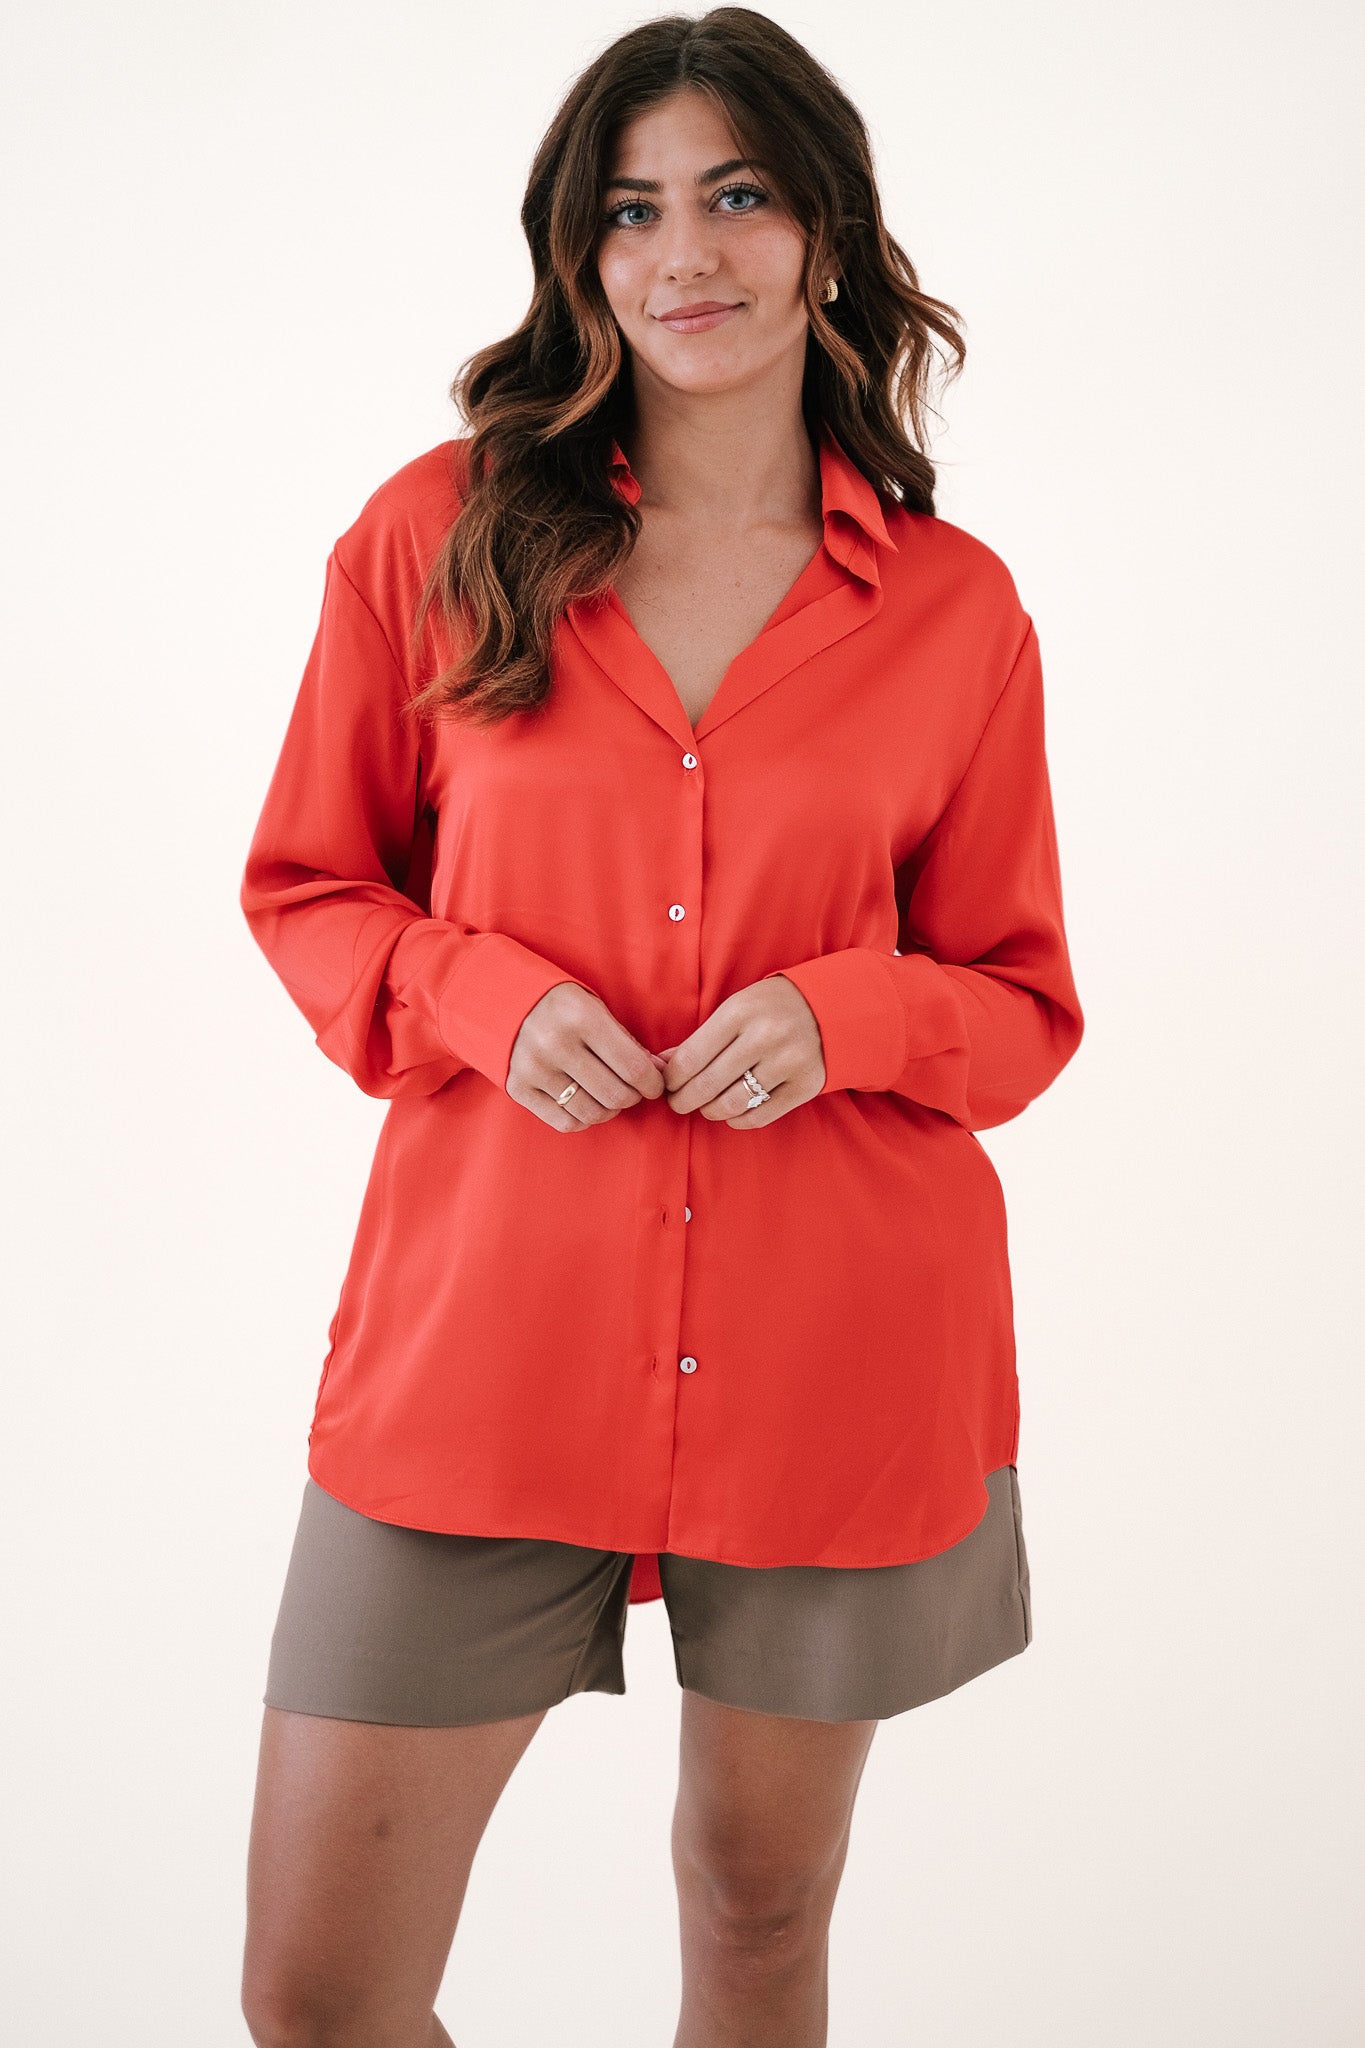 Lucy Paris Elena Red Satin Buttoned Top (XS)